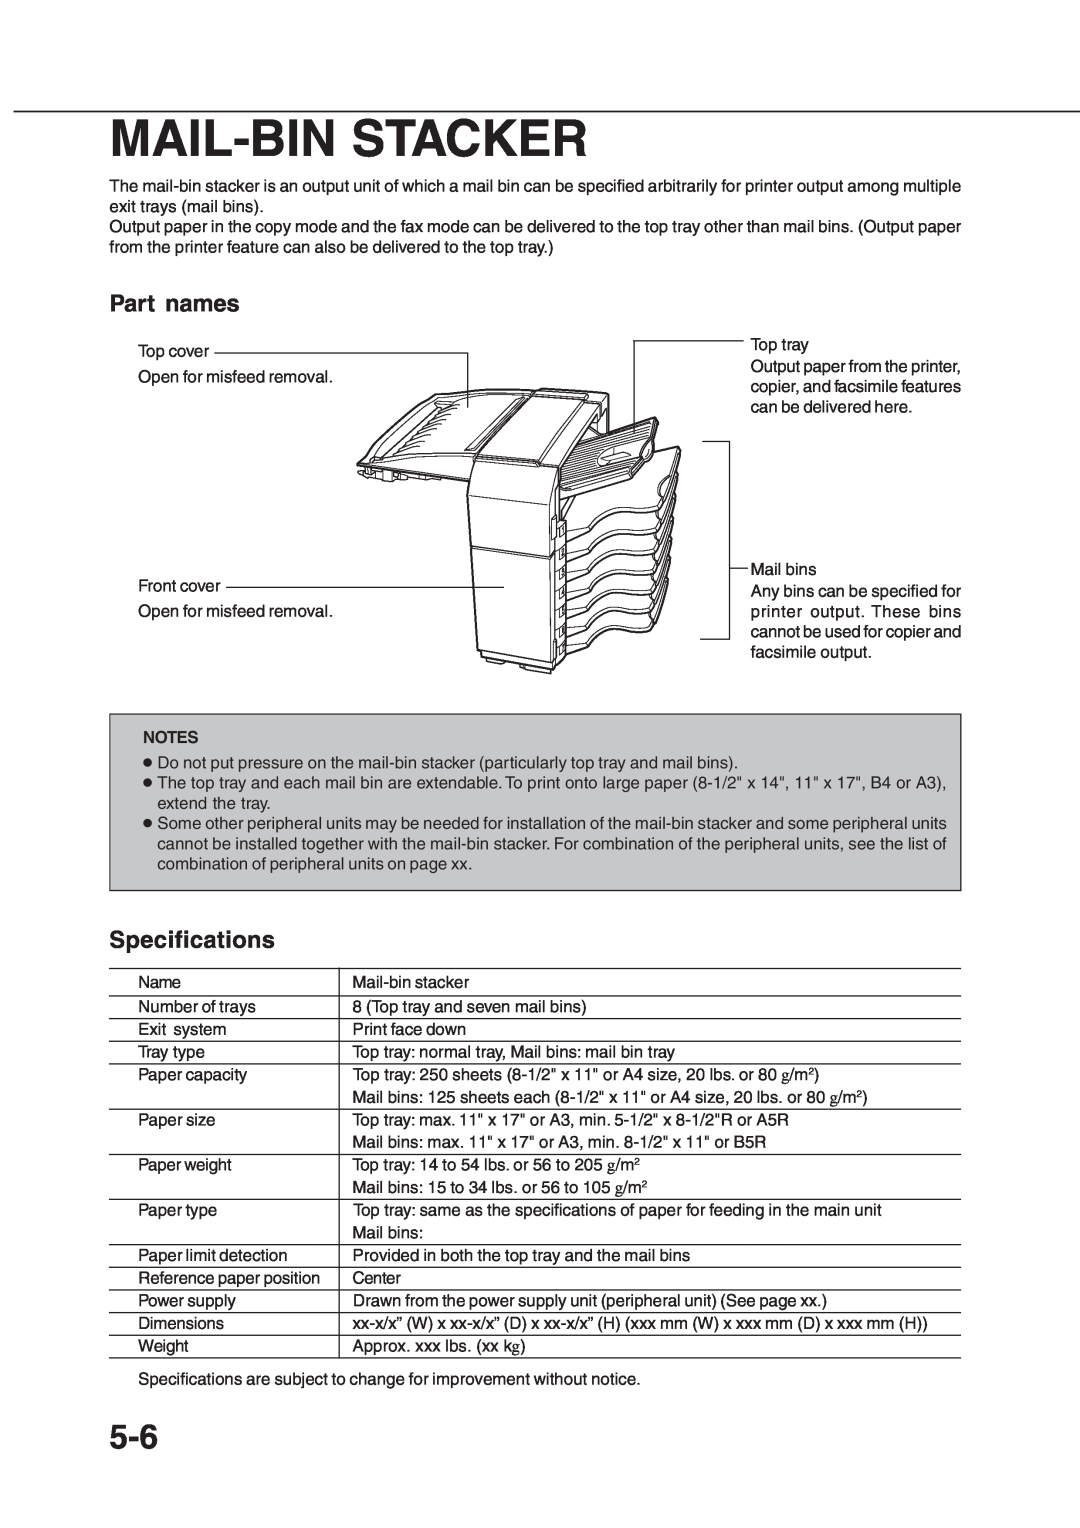 Sharp AR_M280, AR-350 operation manual Mail-Bin Stacker, Part names, Specifications 